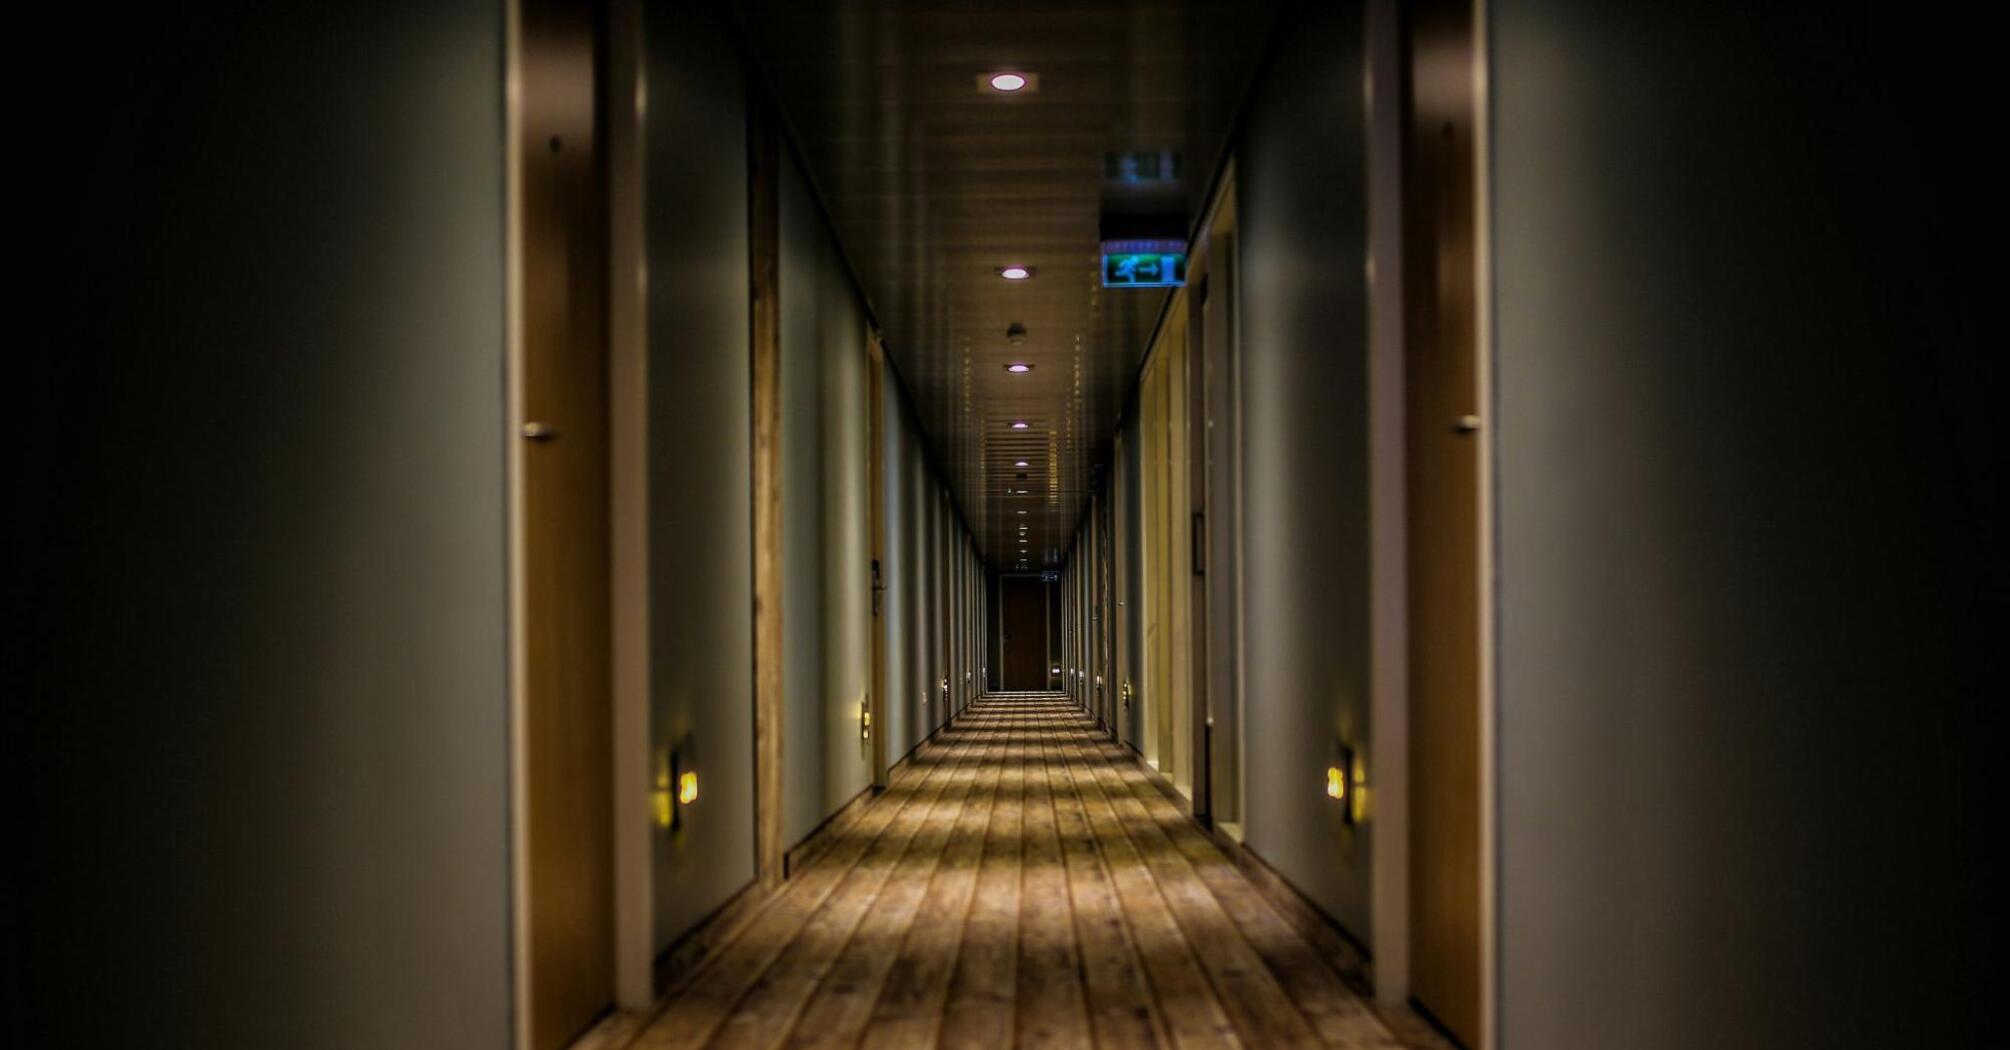 A long corridor with a wooden floor and rows of closed doors